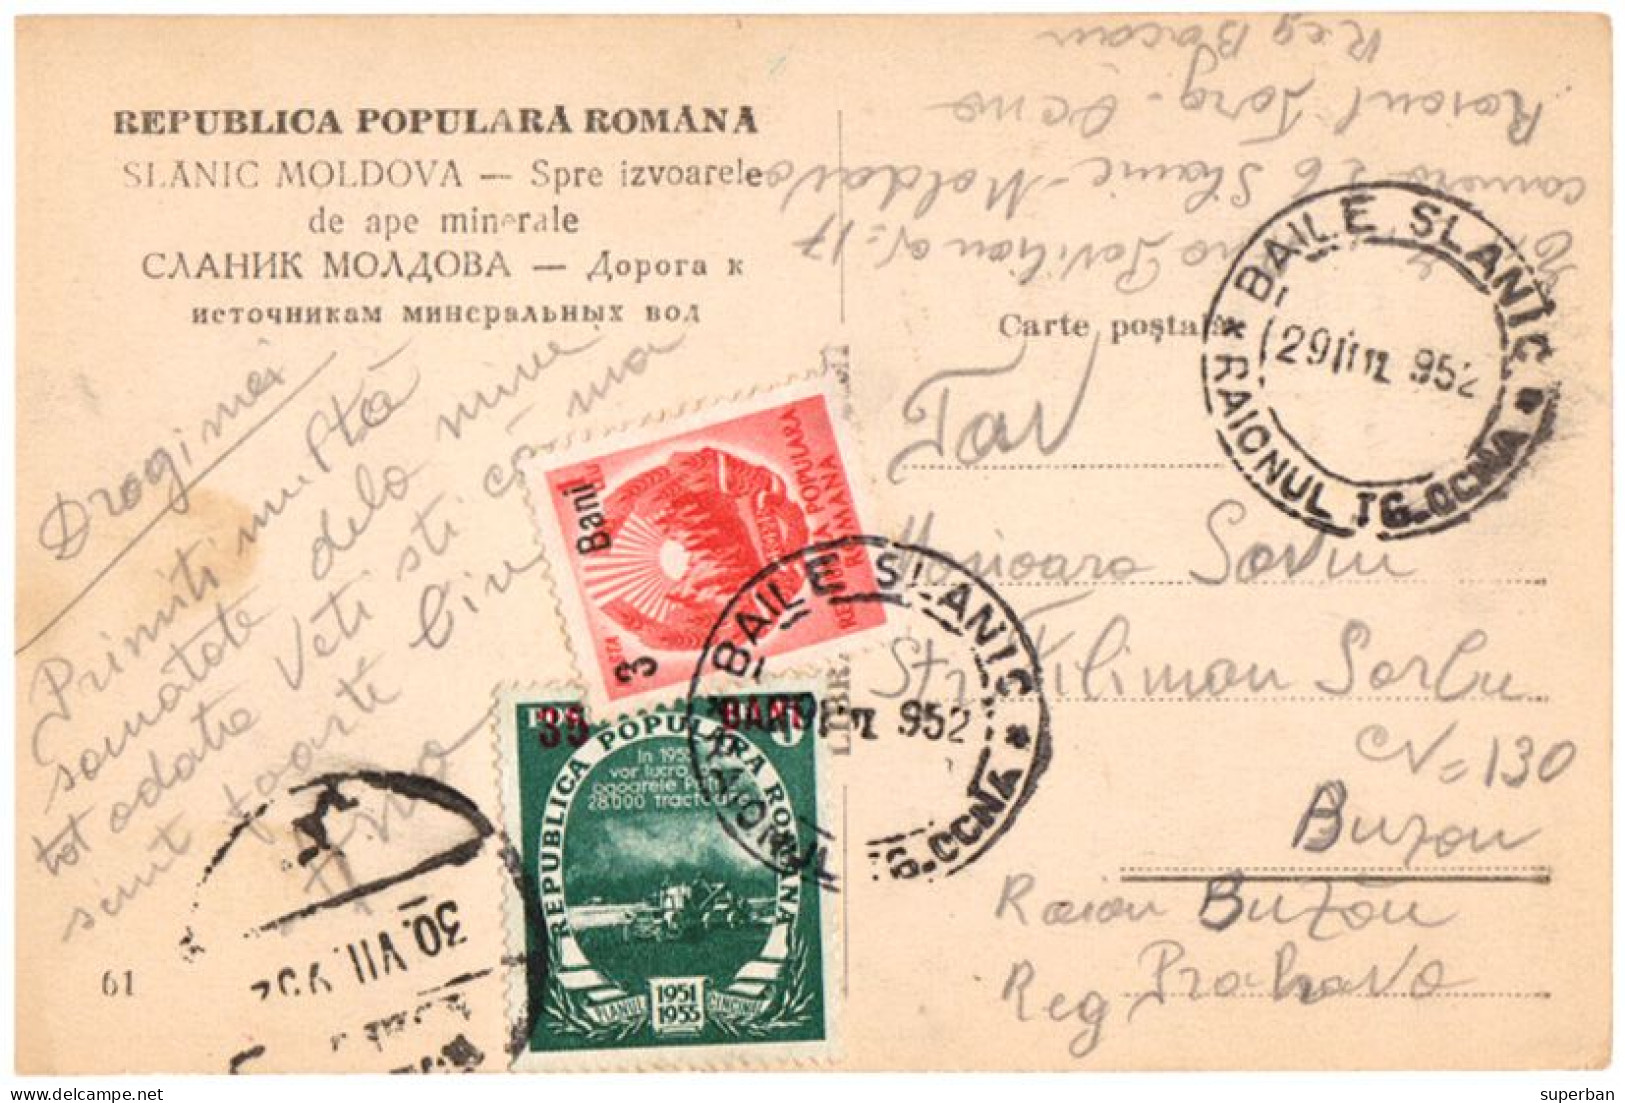 ROMANIA : 1952 - STABILIZAREA MONETARA / MONETARY STABILIZATION - POSTCARD MAILED With OVERPRINTED STAMPS - RRR (an187) - Covers & Documents